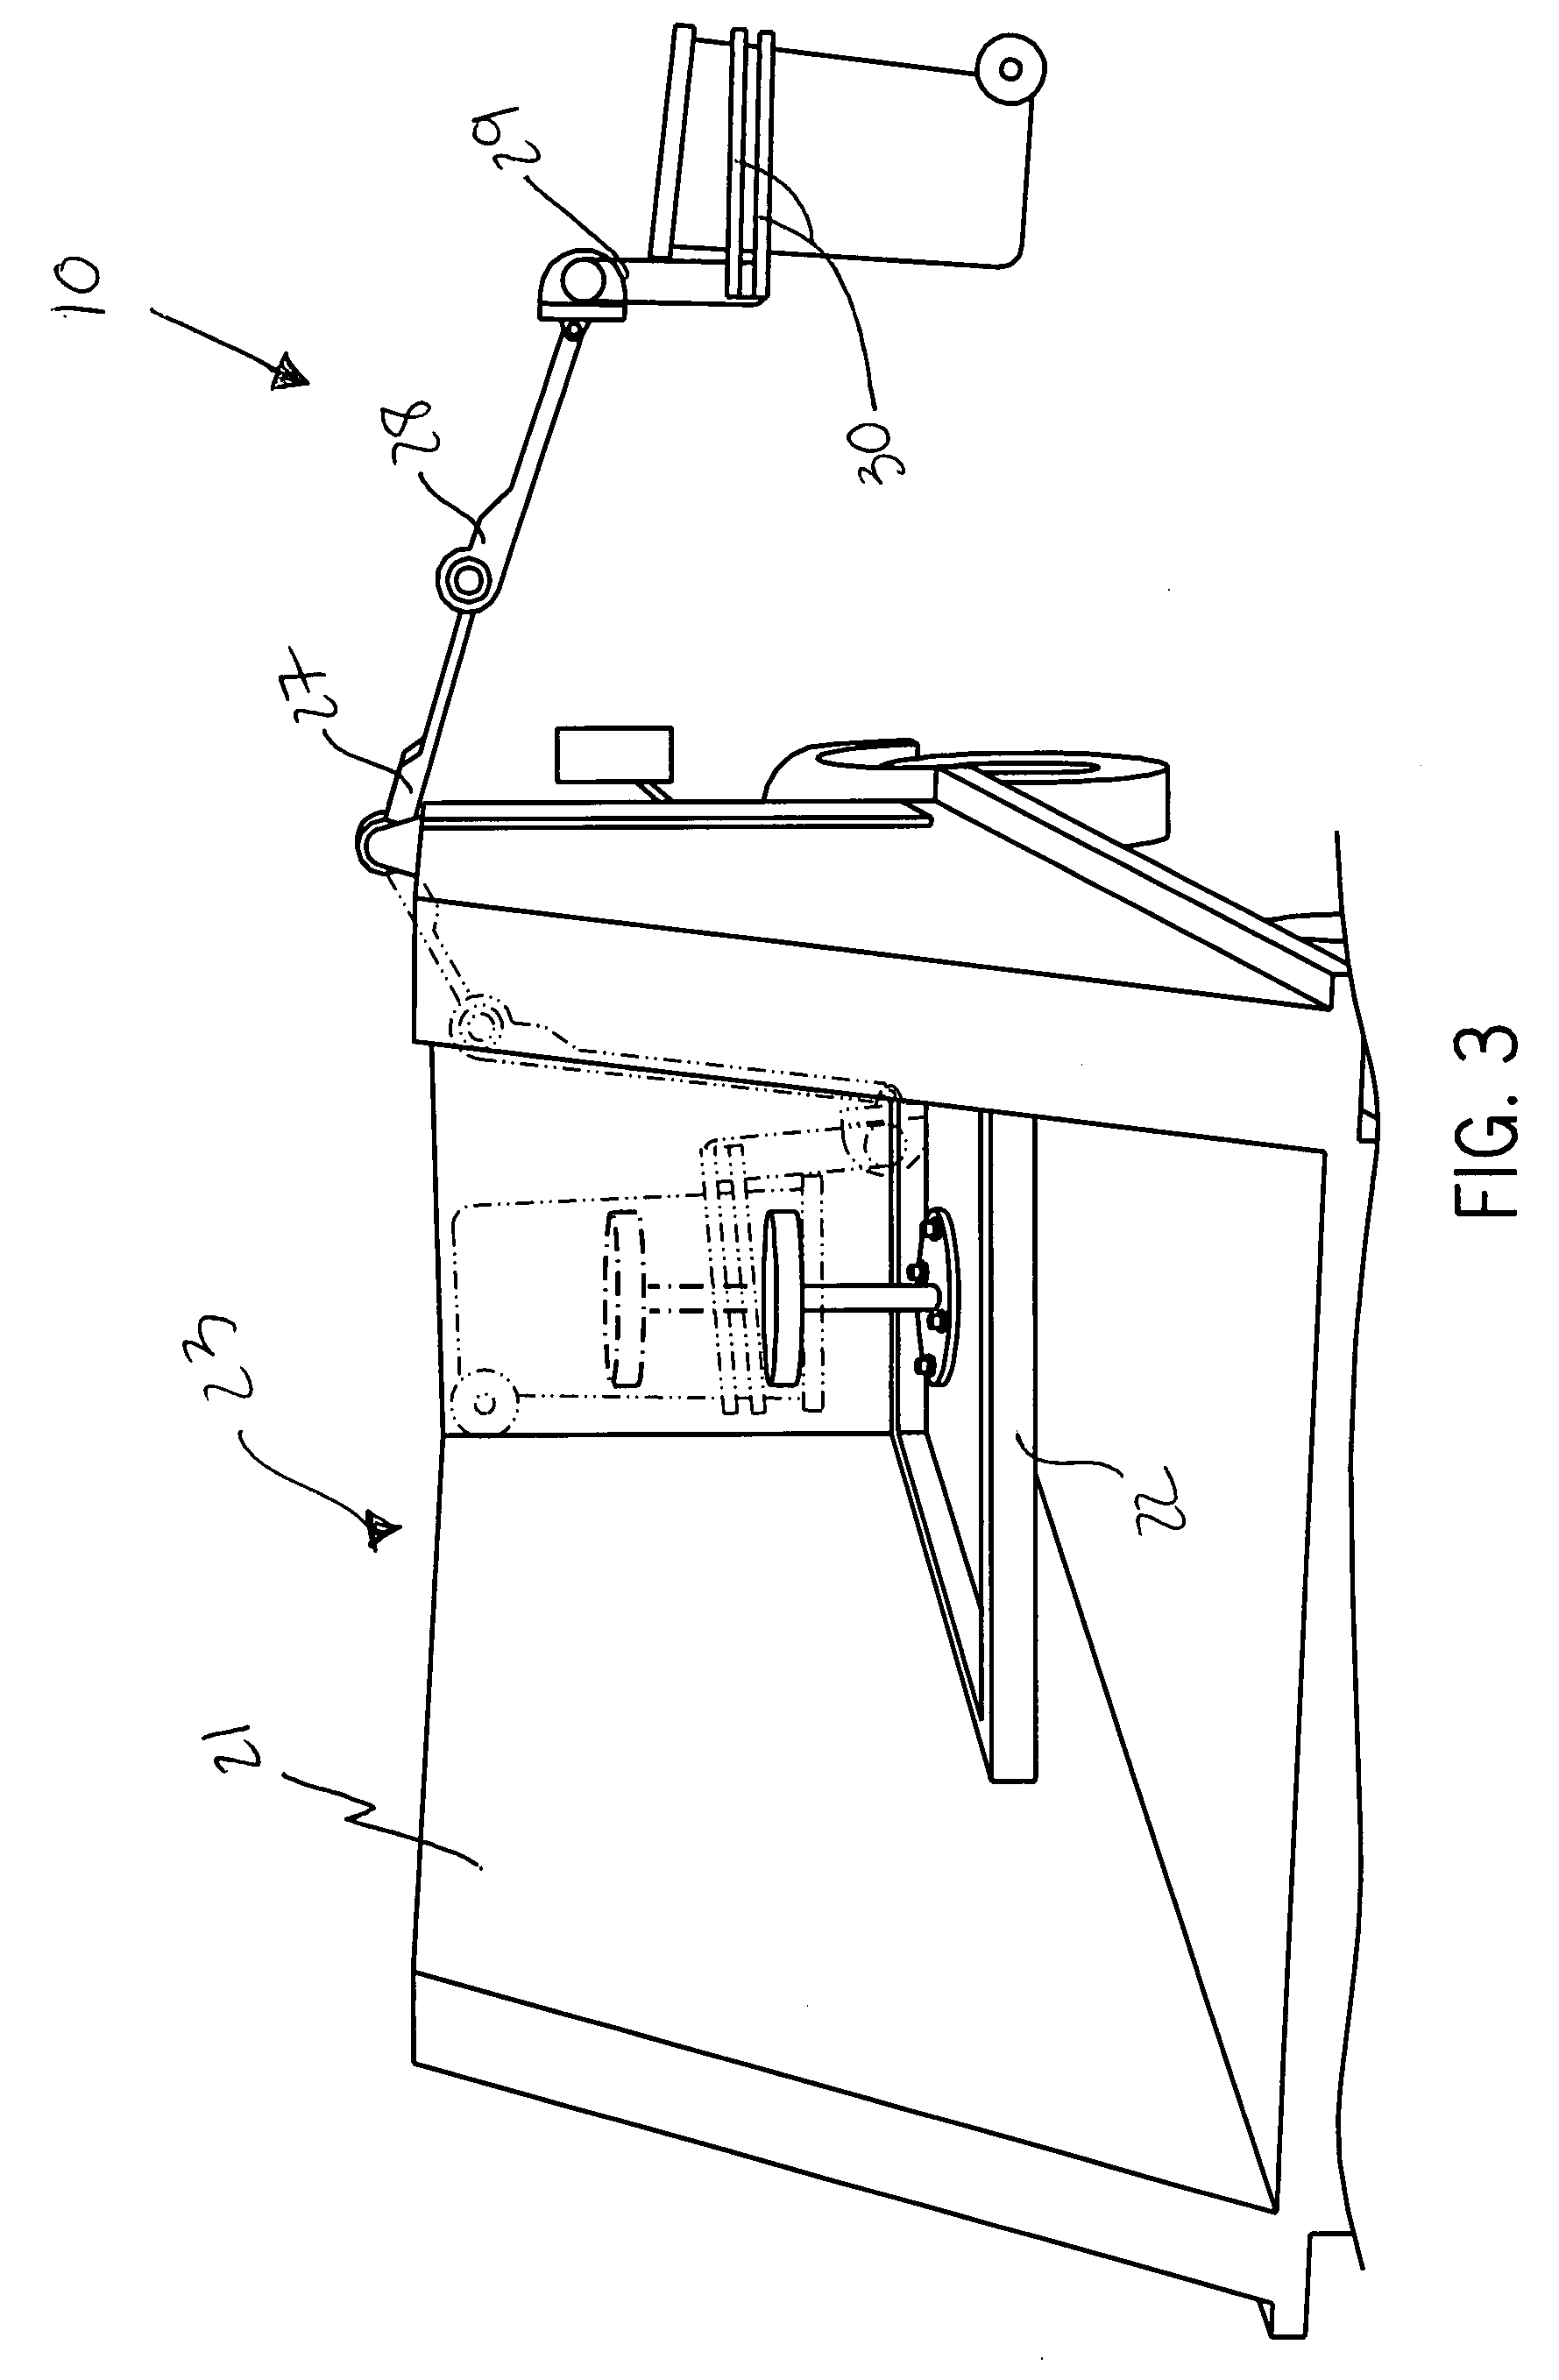 Combined truck and garbage container sanitizing system and associated method